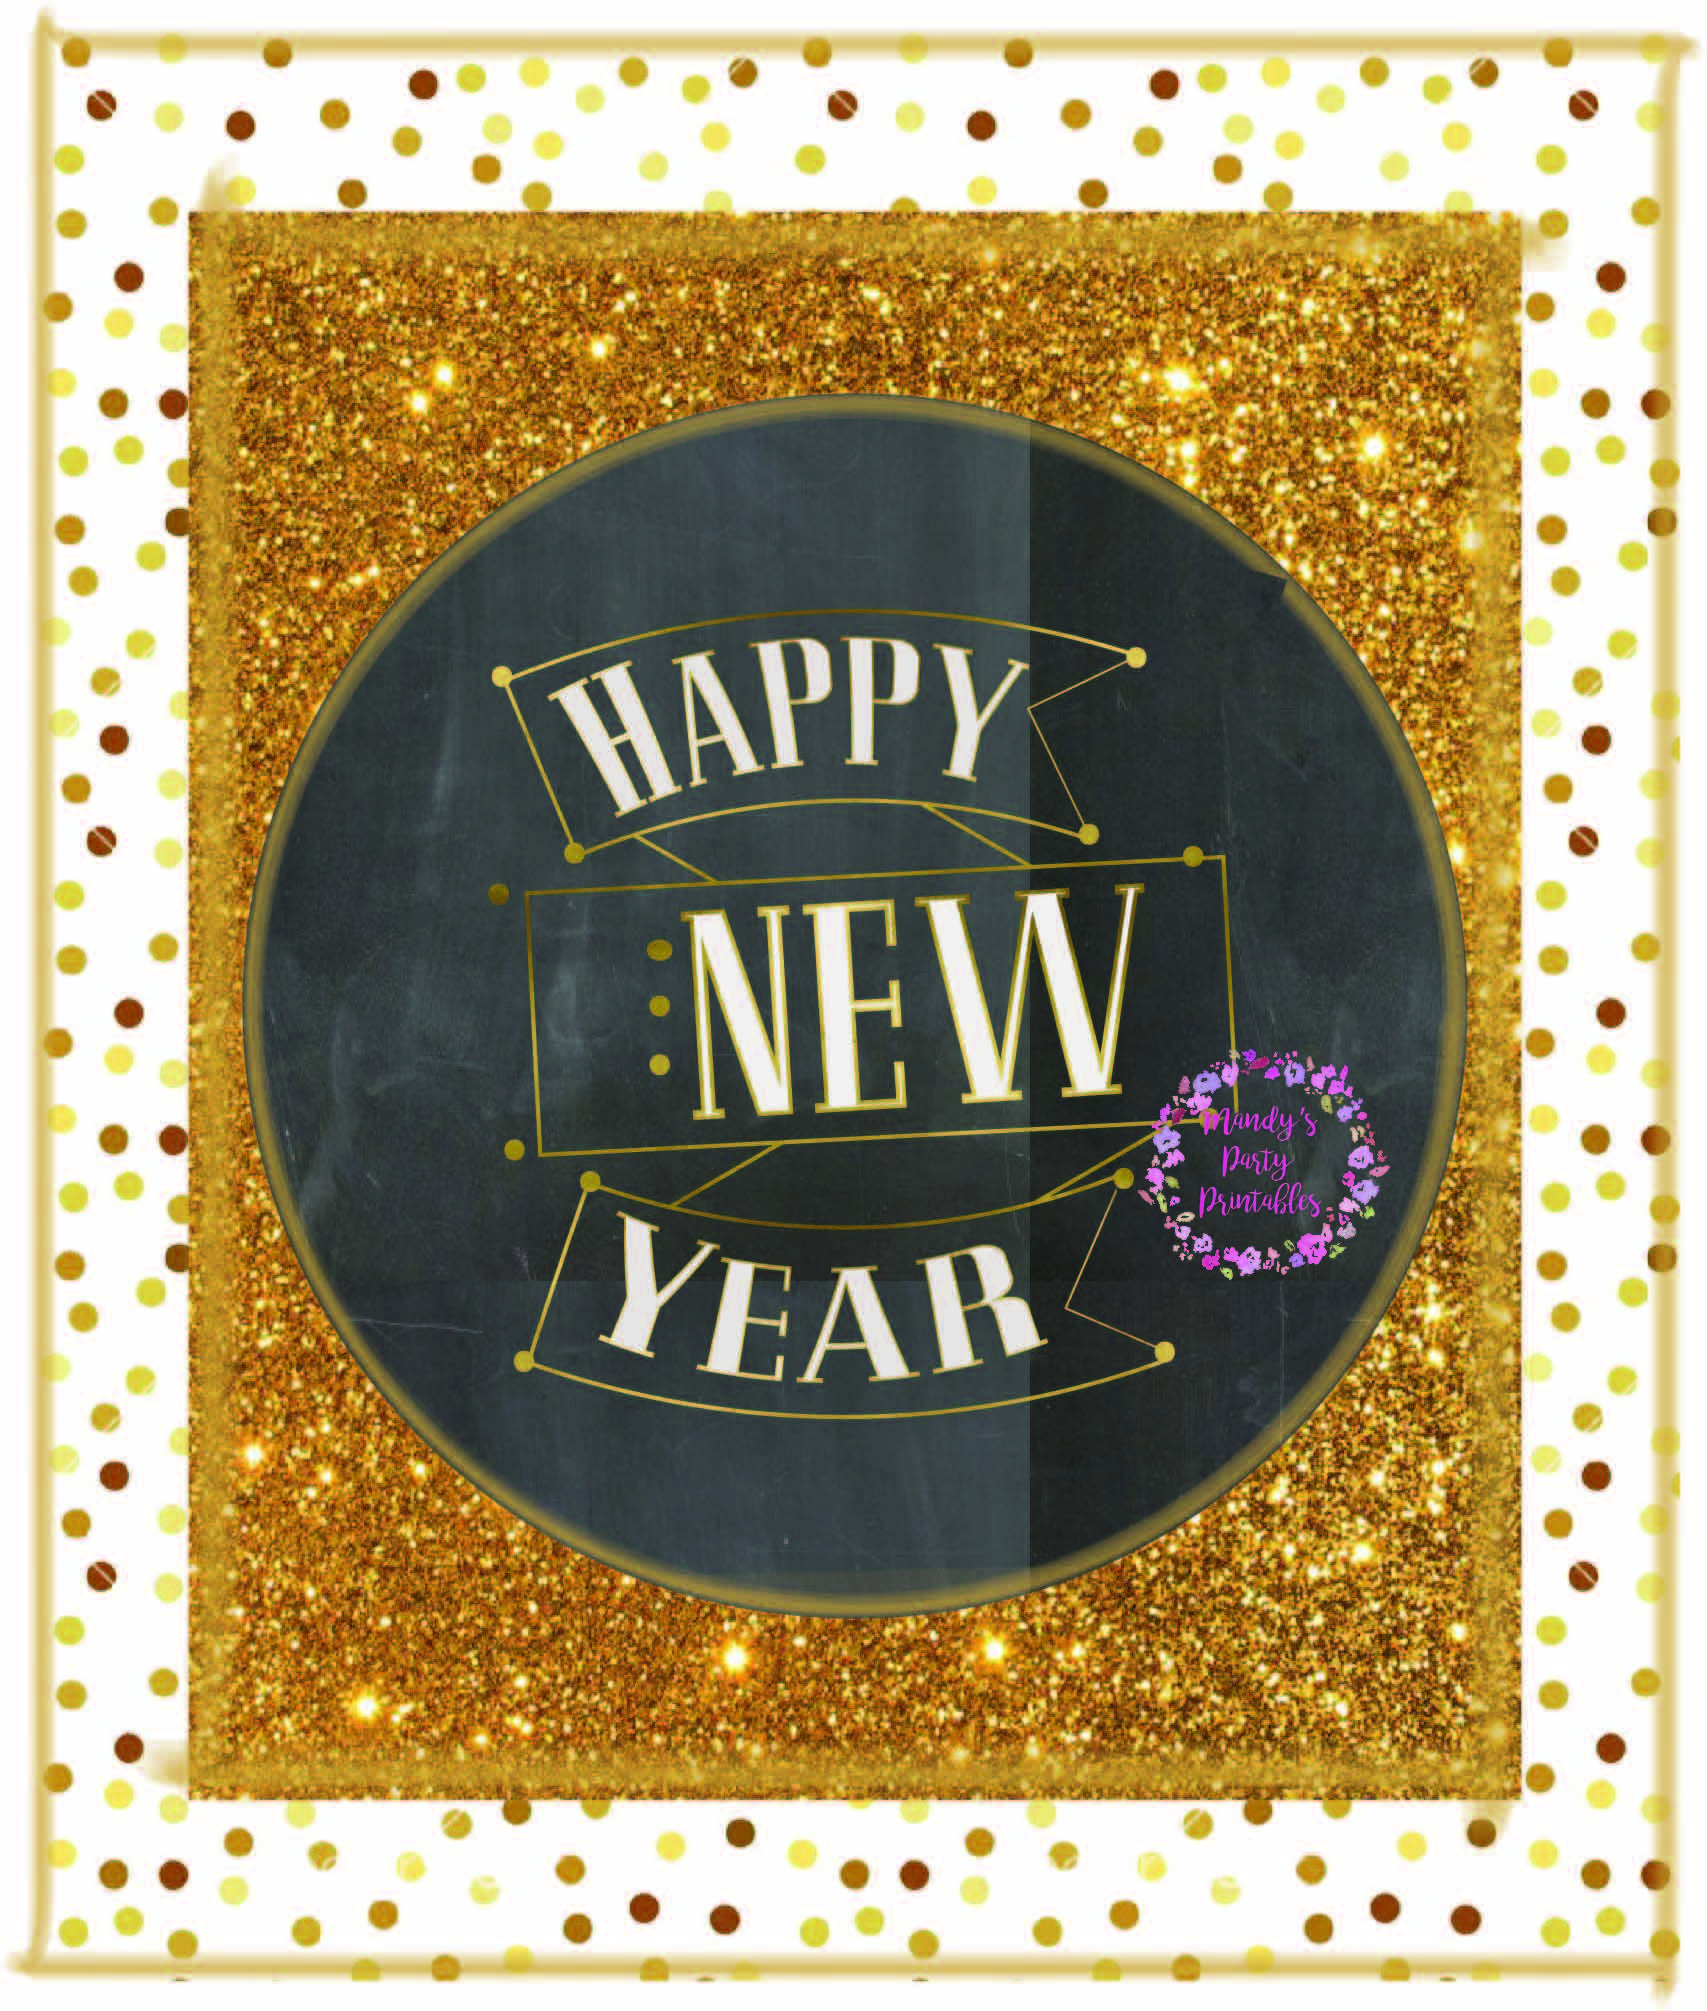 Countdown to Midnight Free New Year's Eve Printables via Mandy's Party Printables